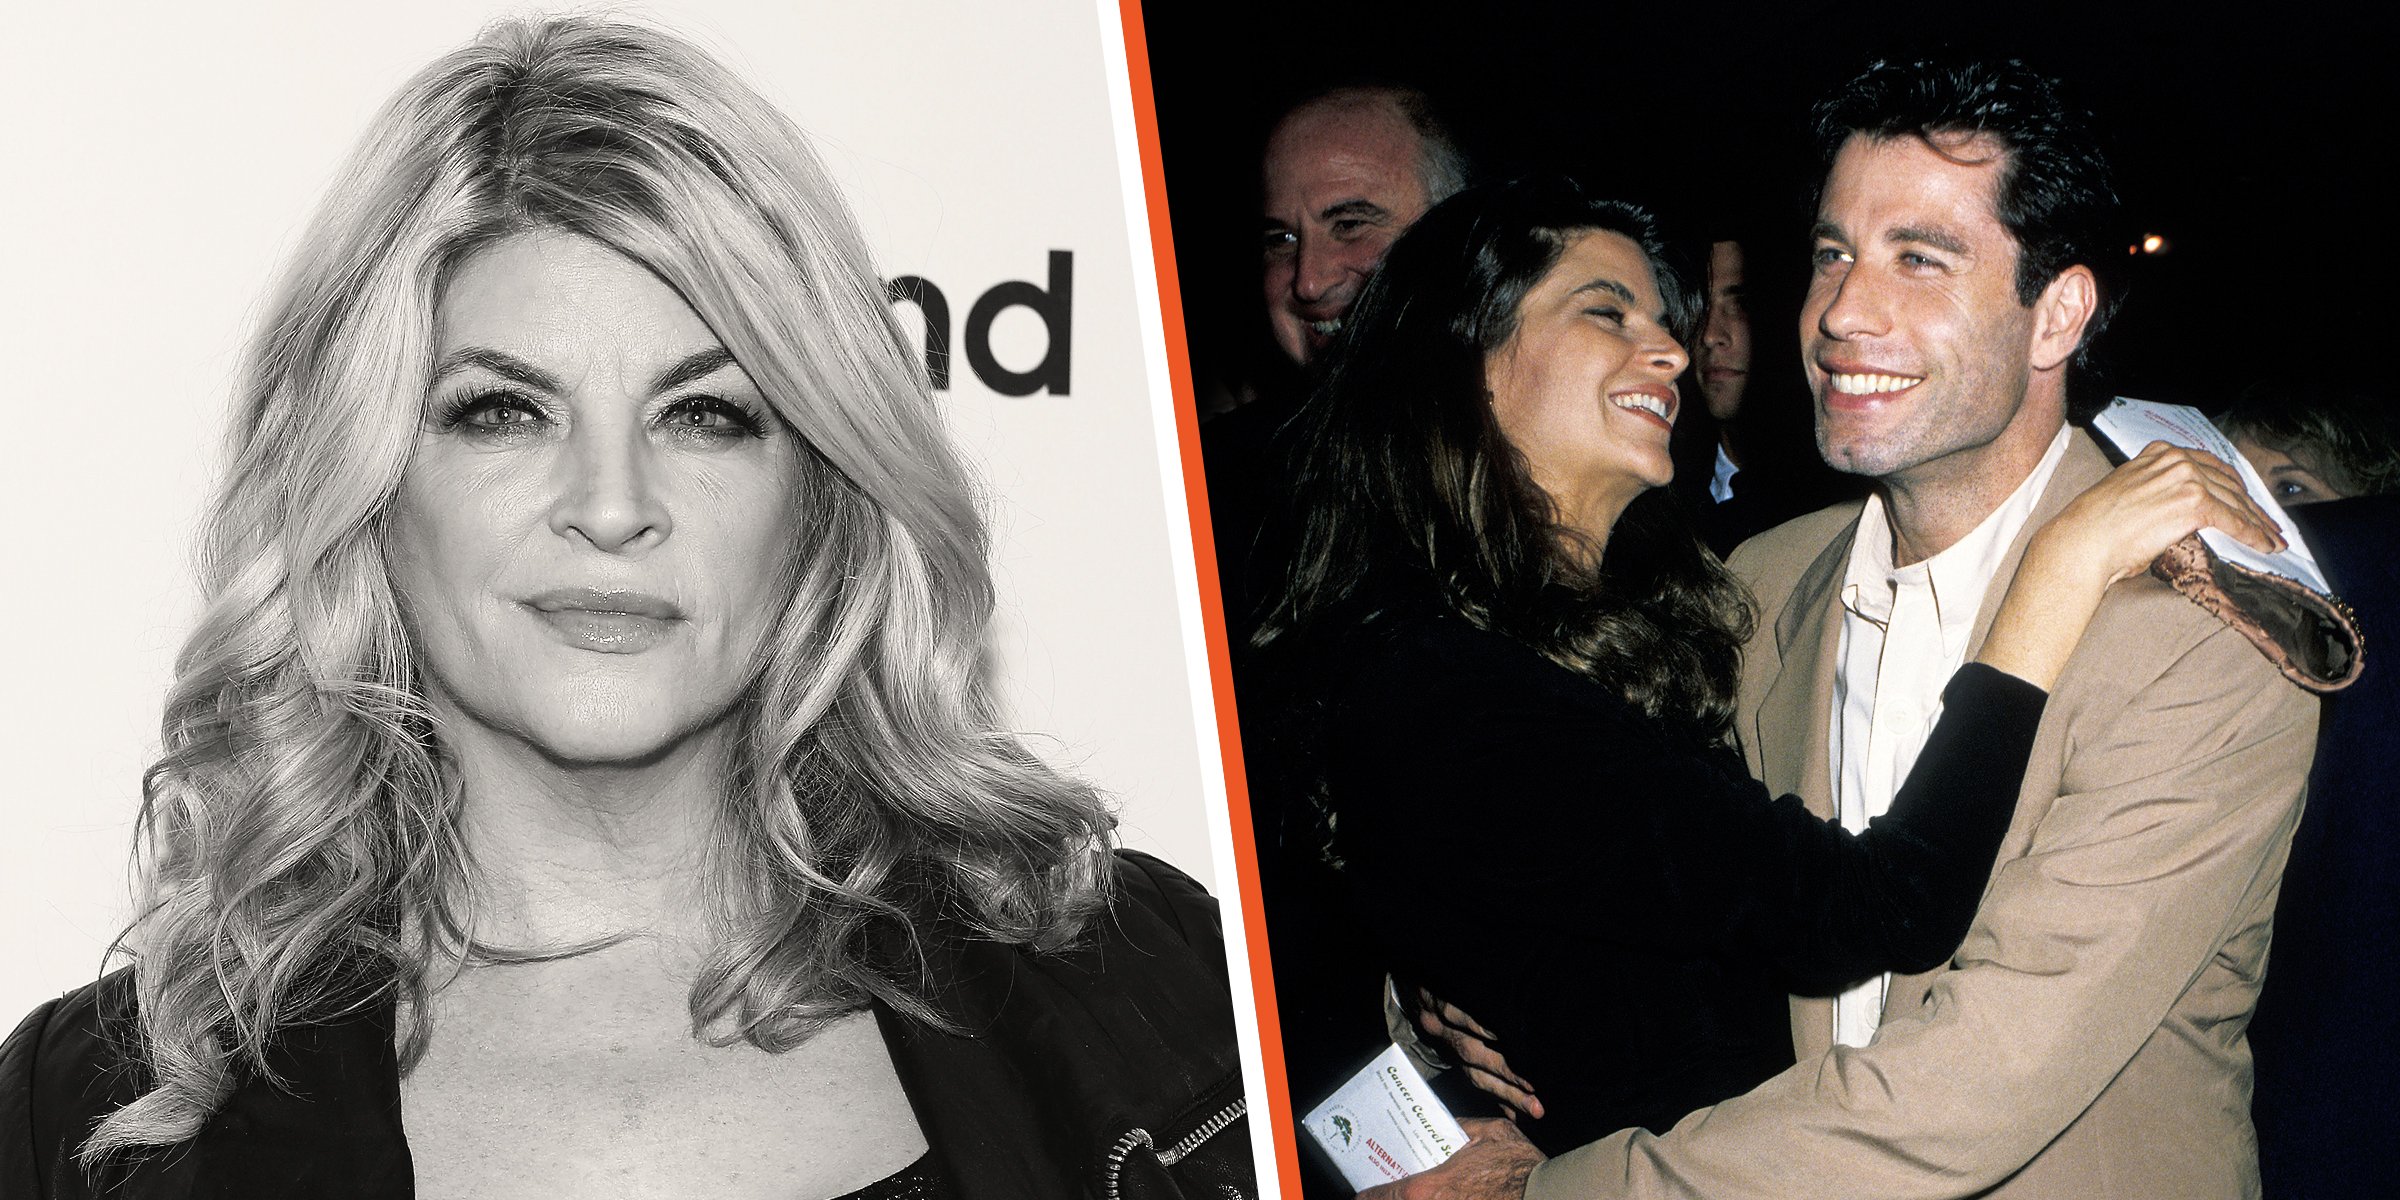 Kirstie Alley | Kirstey Alley and John Travolta | Source: Getty Images